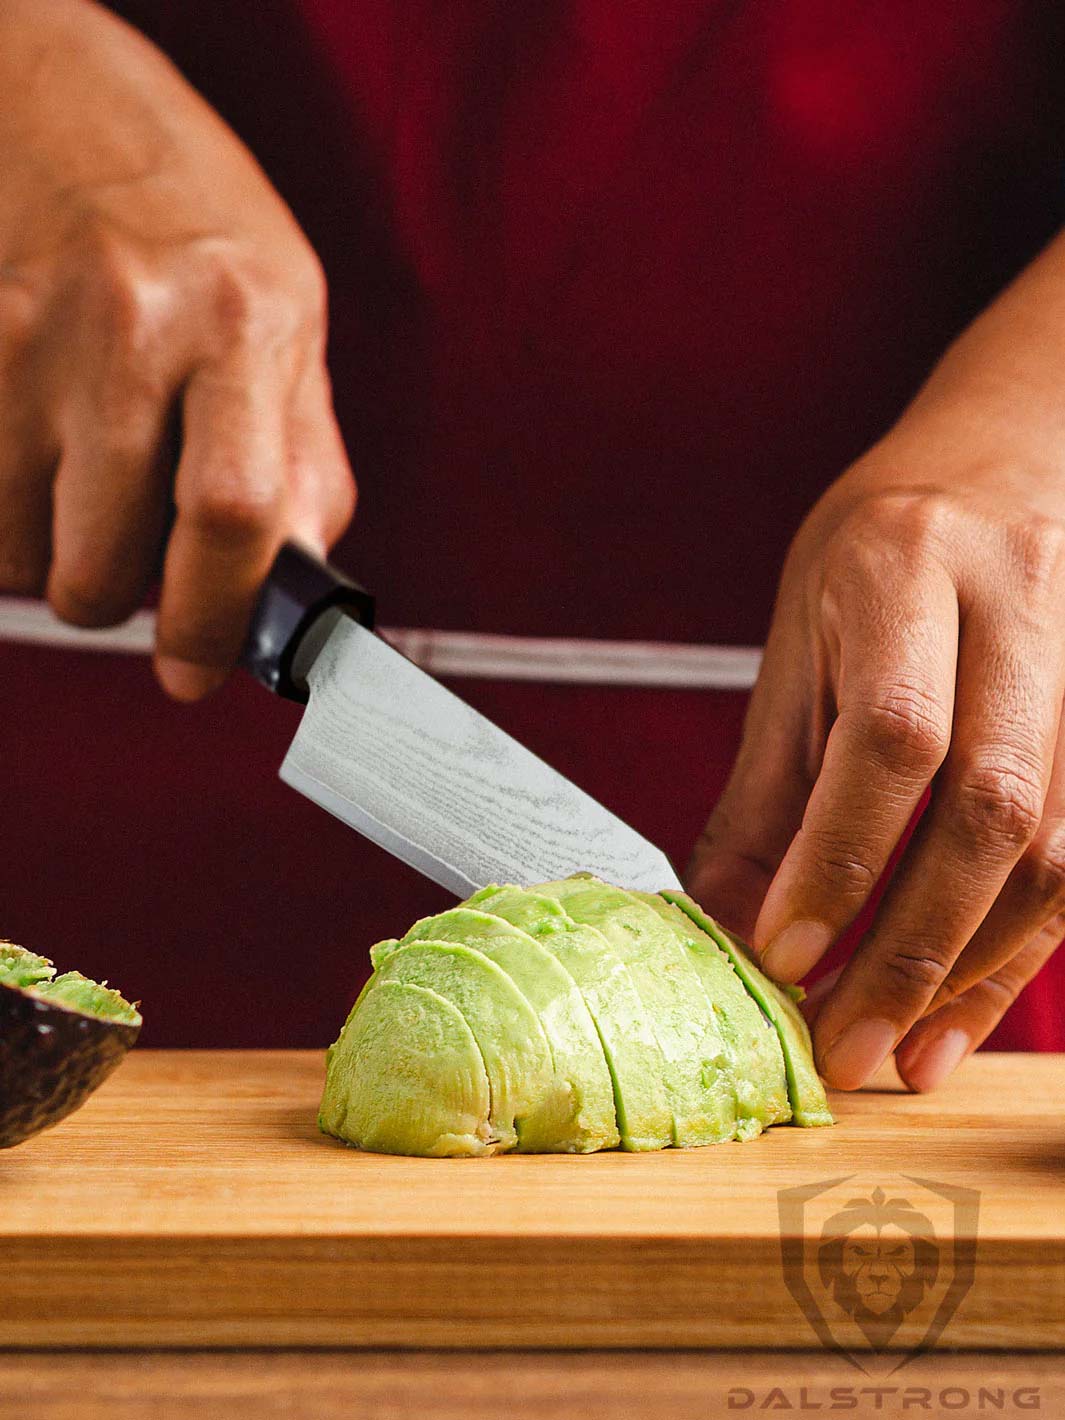 Dalstrong firestorm alpha series 3.75 inch paring knife with a peeled and sliced avocado on a cutting board.